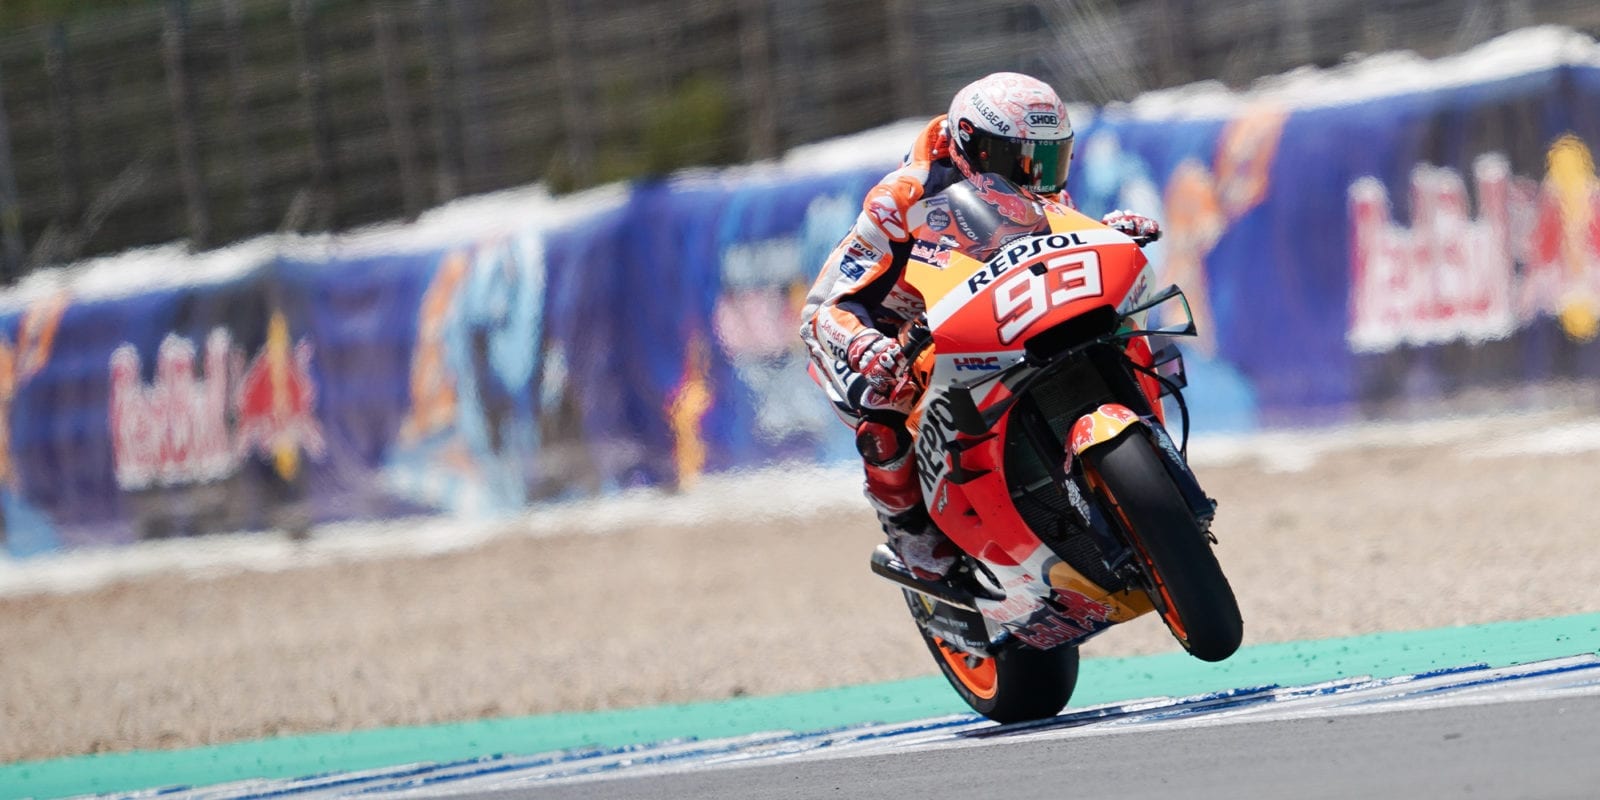 Marc Marquez lifts his front wheel during the 2020 MotoGP Spanish Grand Prix